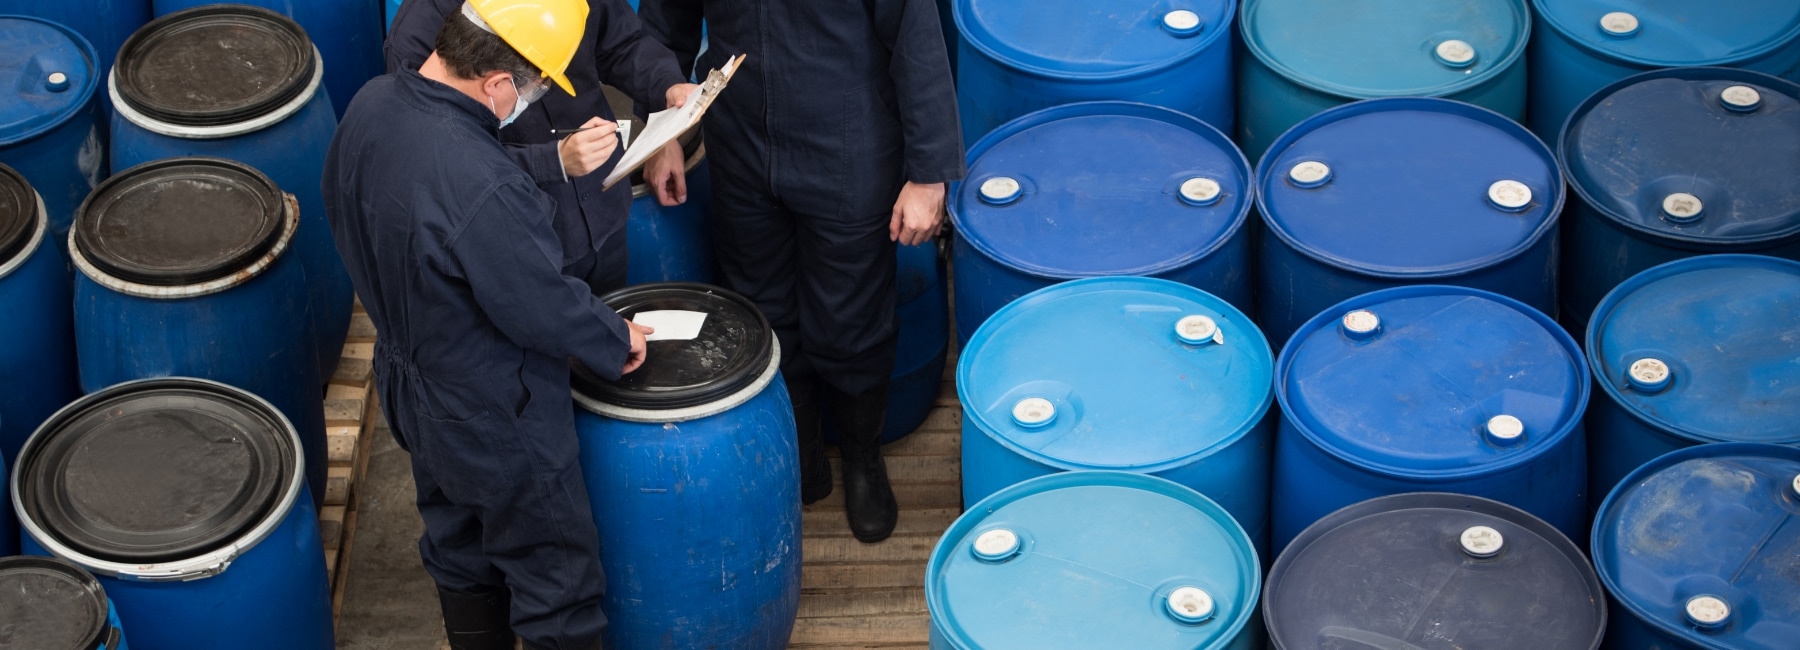 Employees with drums of chemicals checking data